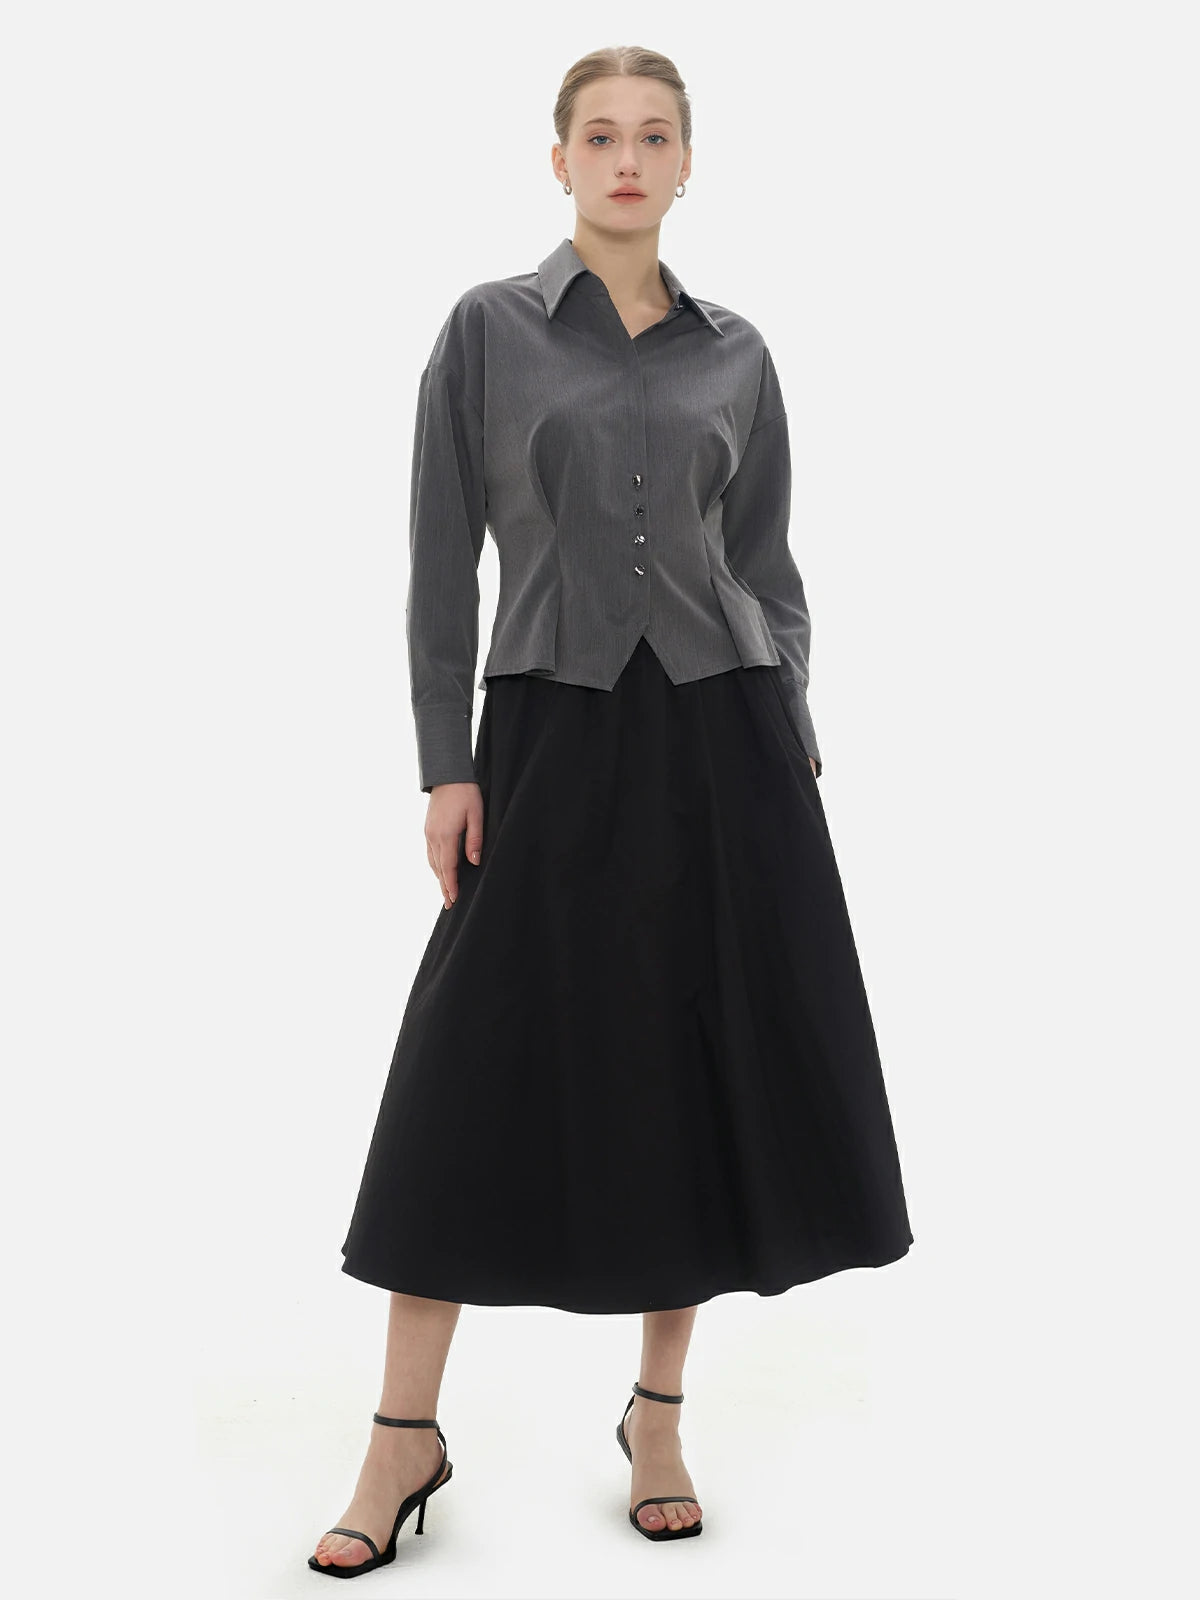 Infuse your look with elegance and style in this collared blouse, featuring pleats, a cinched waist, and dropped-shoulder sleeves.